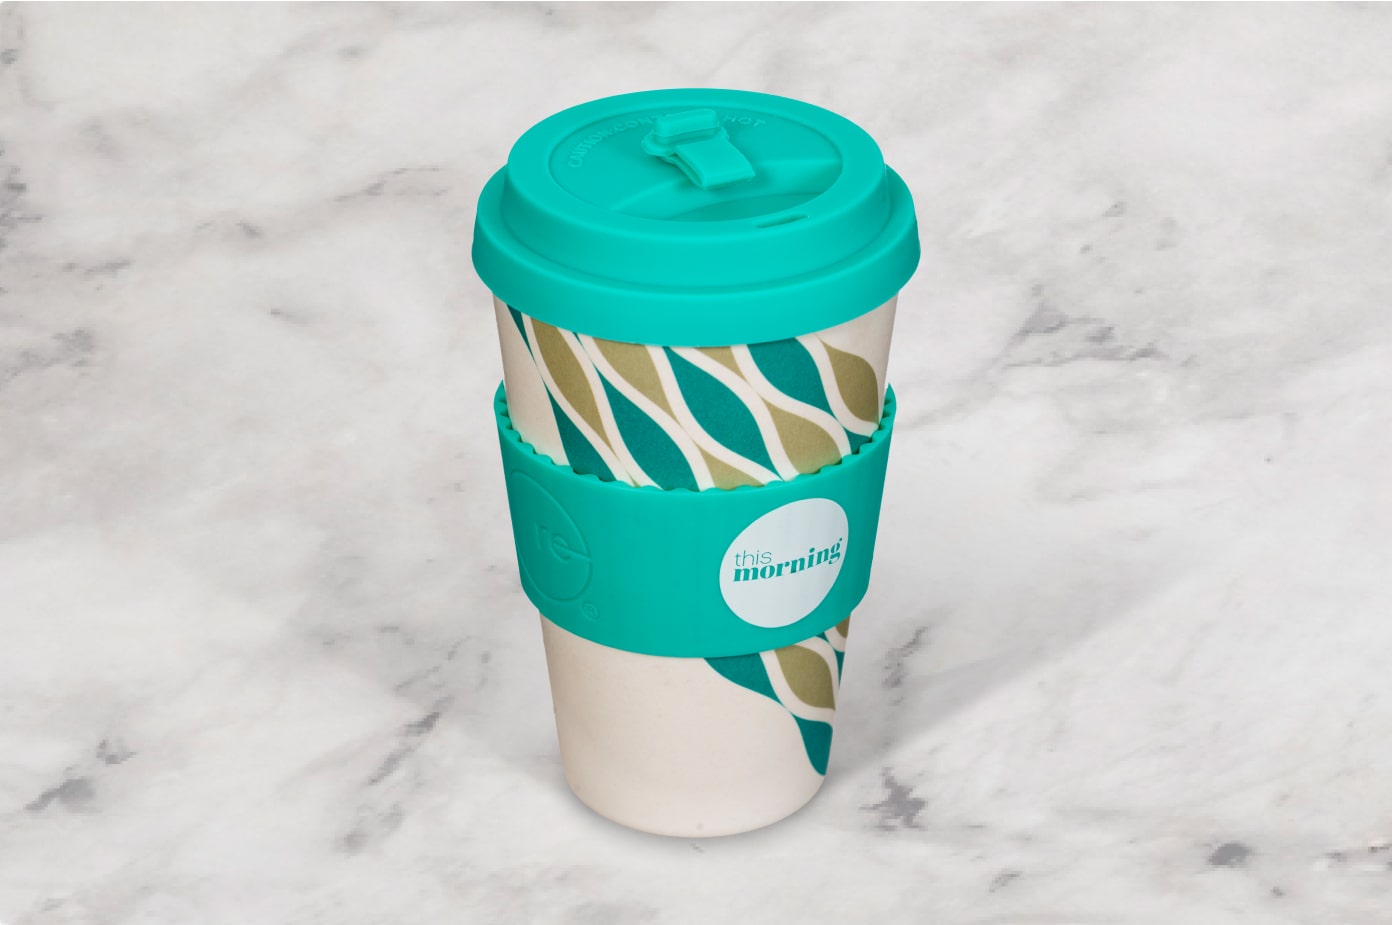 This Morning Reusable Cup - Teal